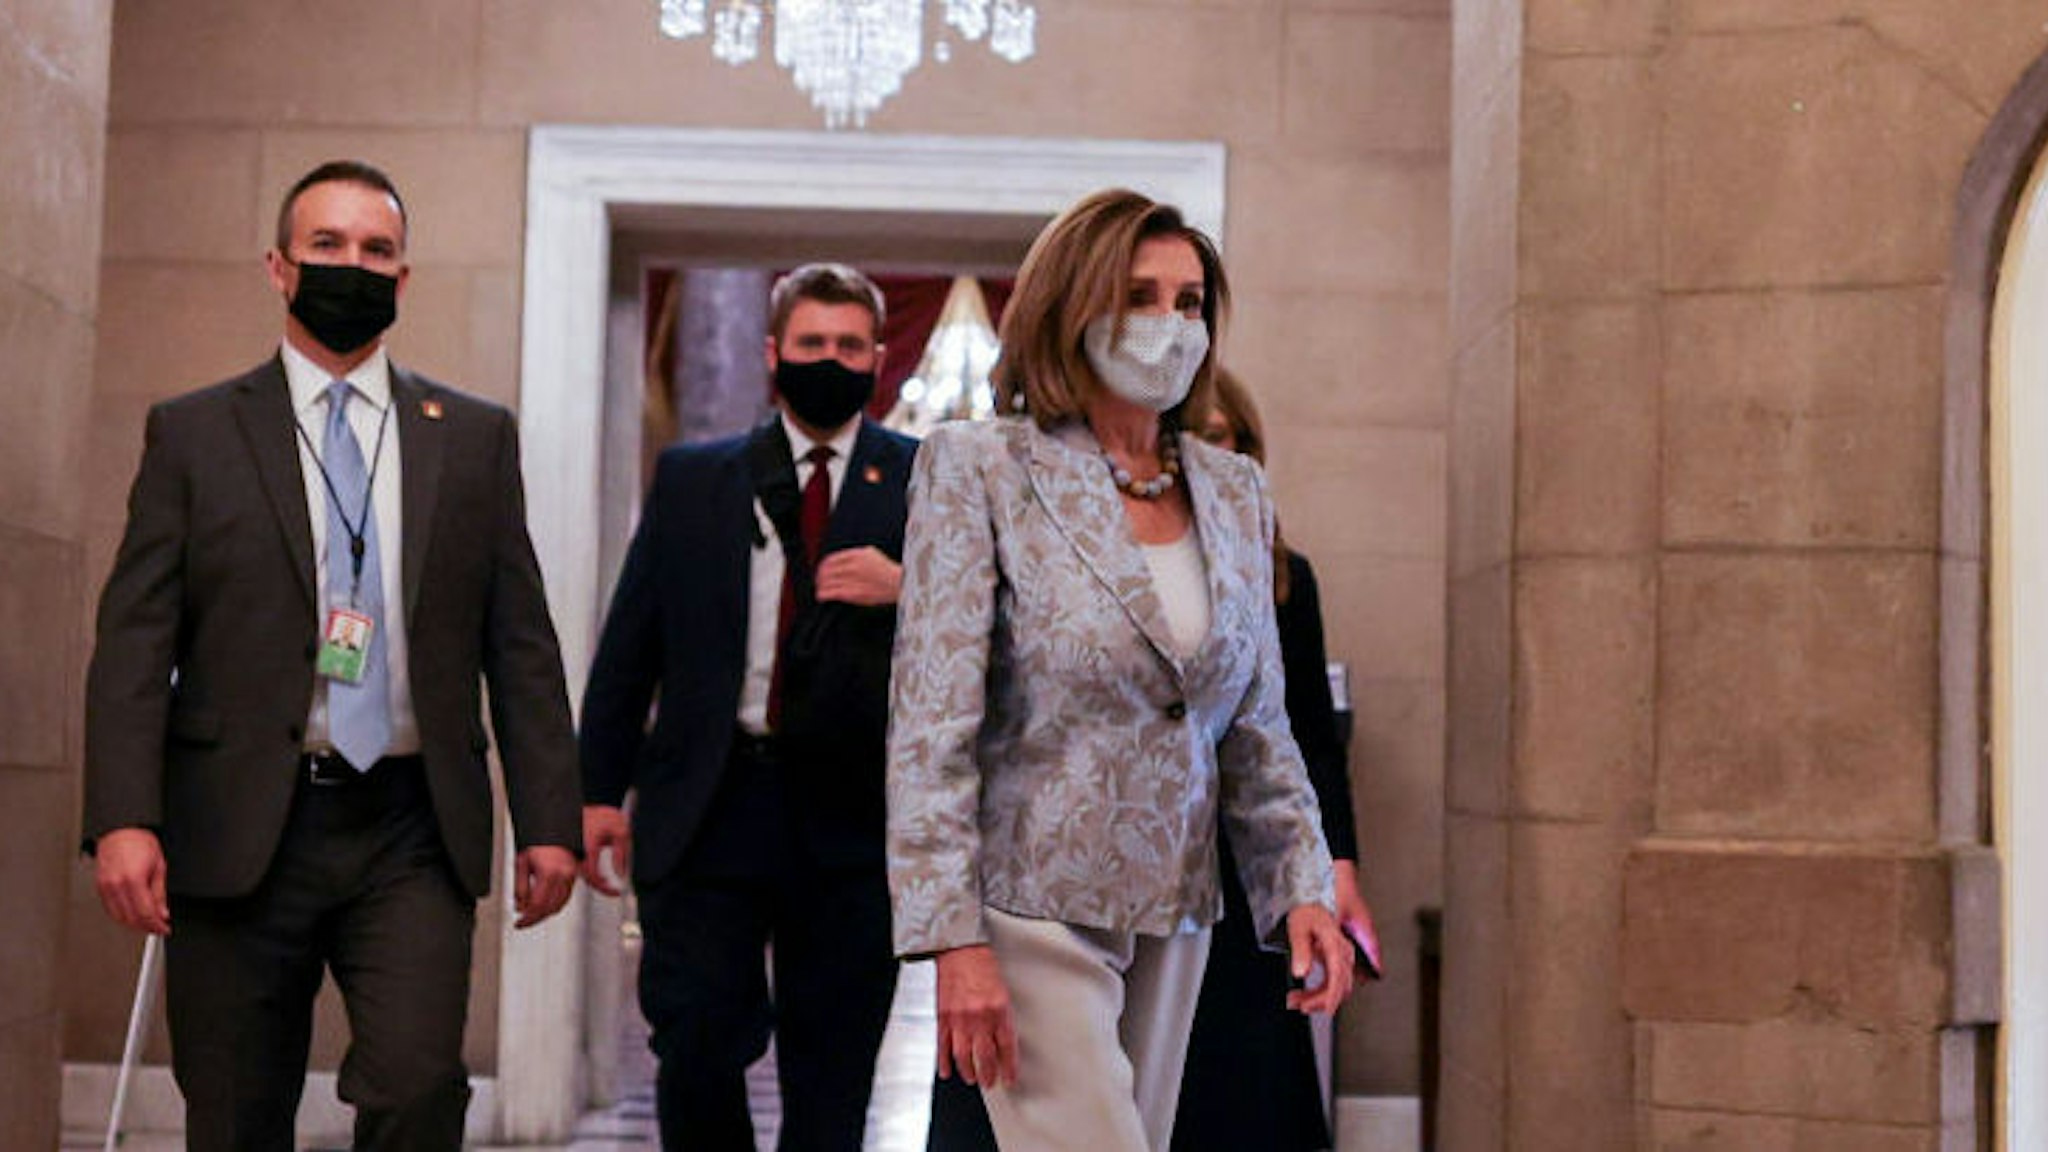 WASHINGTON, DC - JANUARY 03: Speaker of the House Nancy Pelosi (D-CA) walks back to her office after being in the house chamber in the US Capitol on January 03, 2021 in Washington, DC. Both chambers are holding rare Sunday sessions to open the new Congress on January 3 as the Constitution requires.